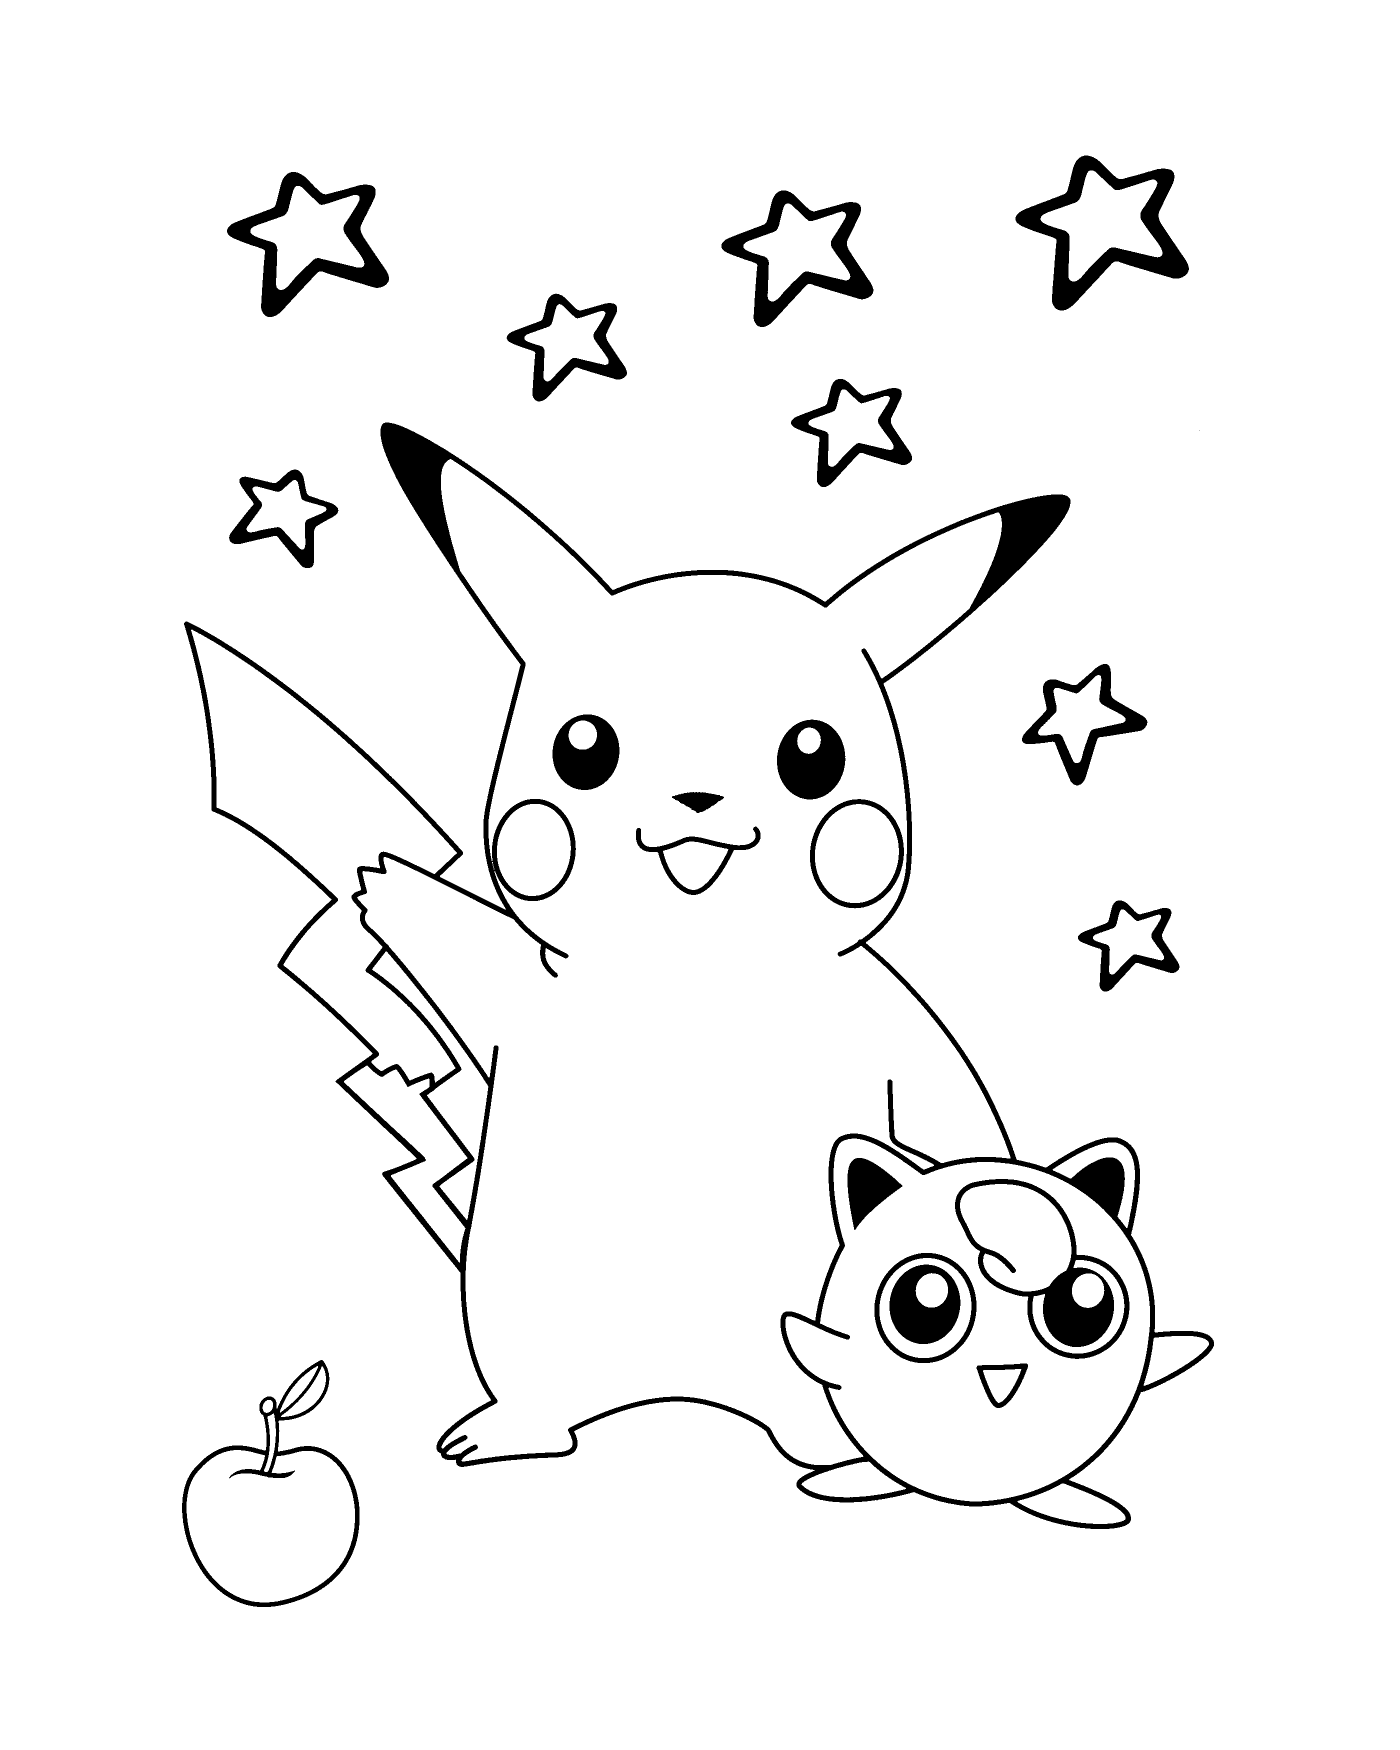  Pikachu, adorable and starry 